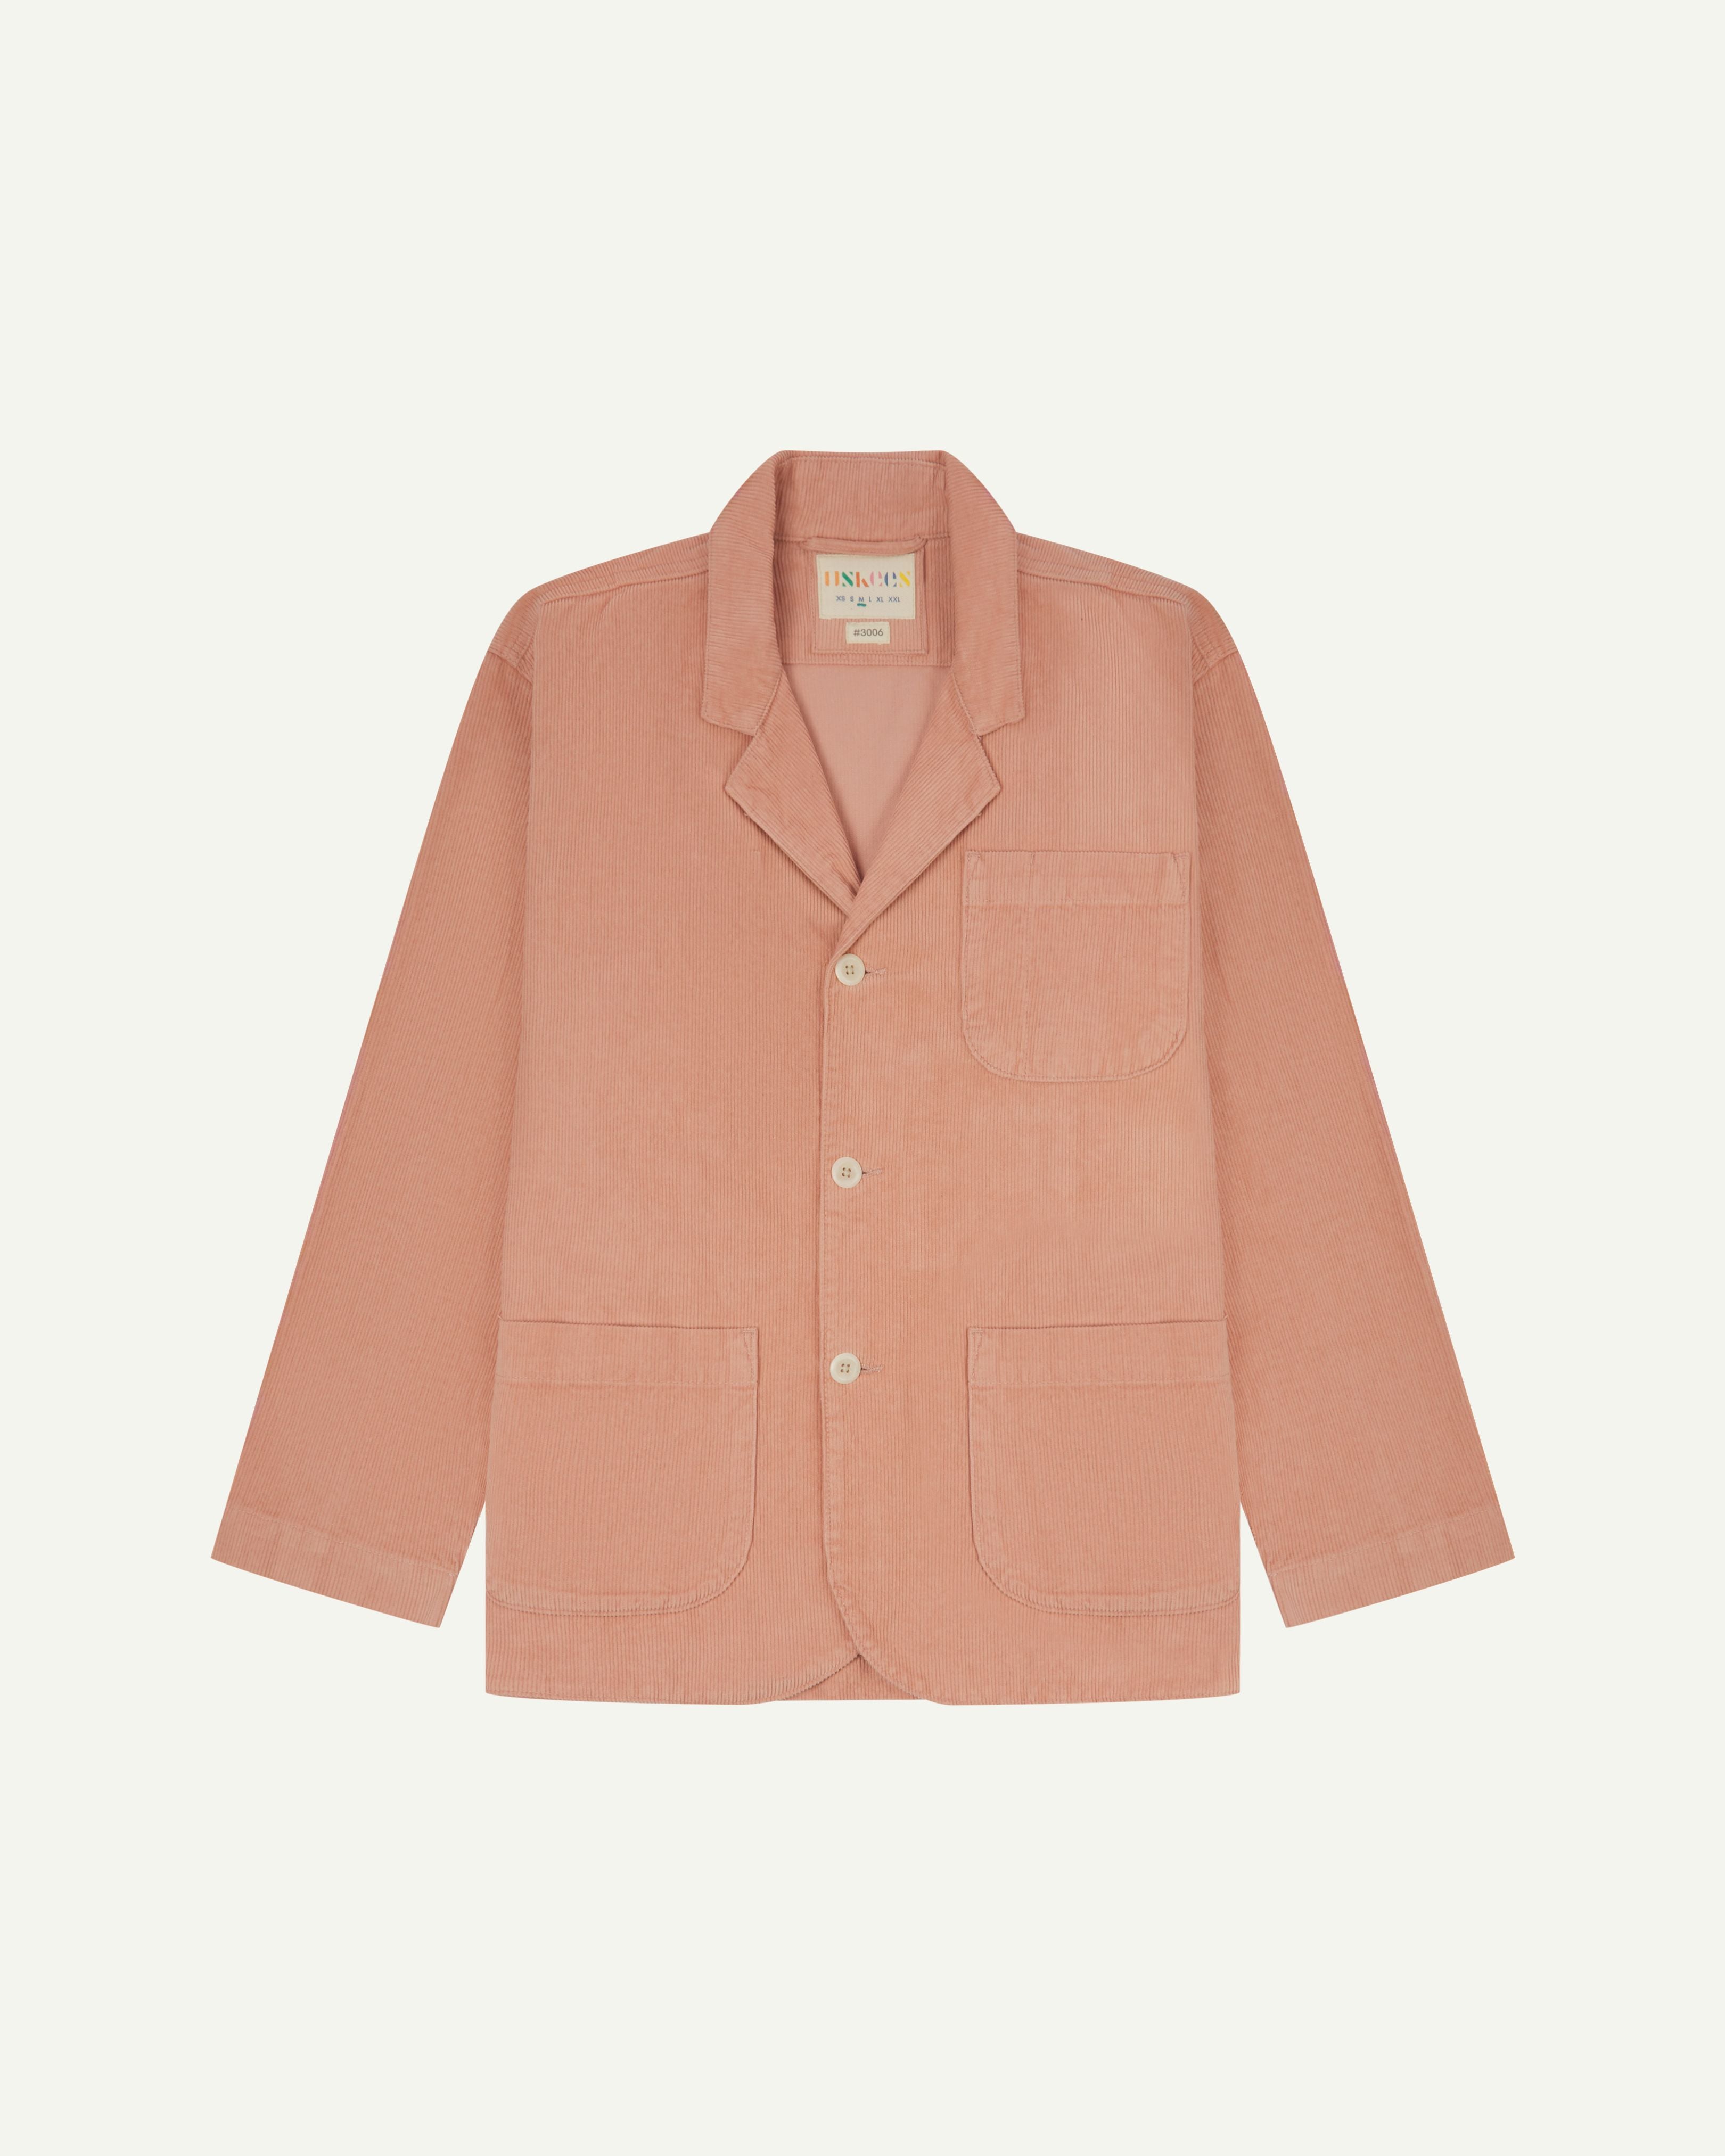 Front flat shot of Uskees pale pink corduroy men's blazer buttoned up